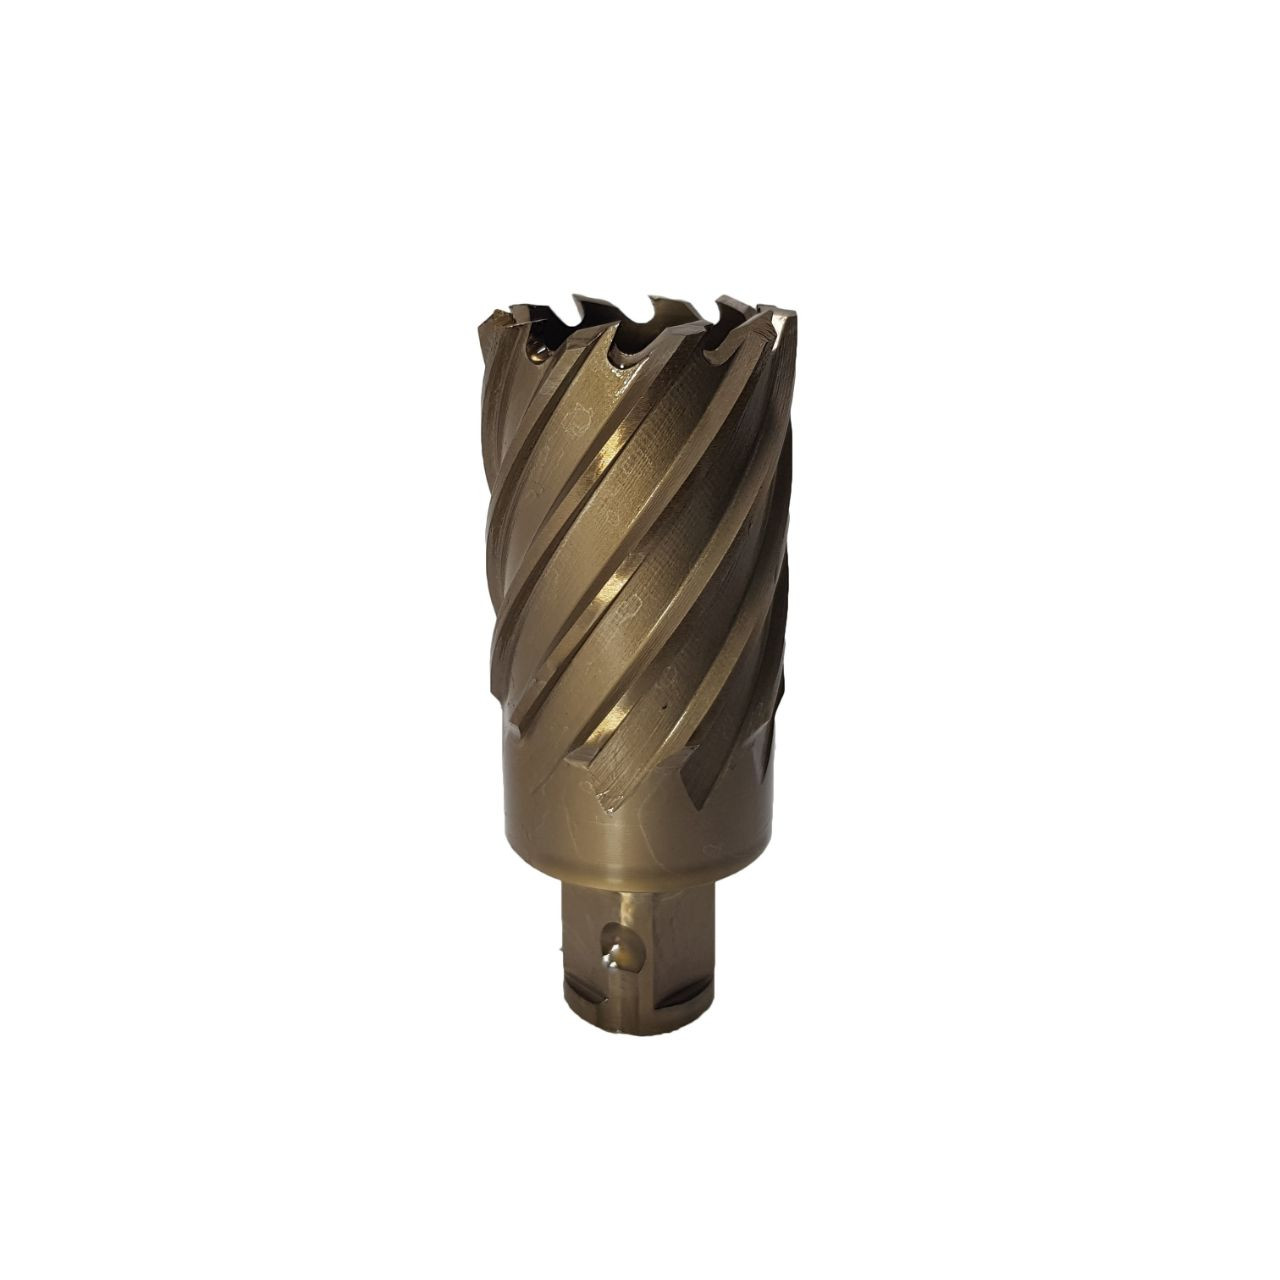 35 X 50 HSS-Co Excision Core Drill